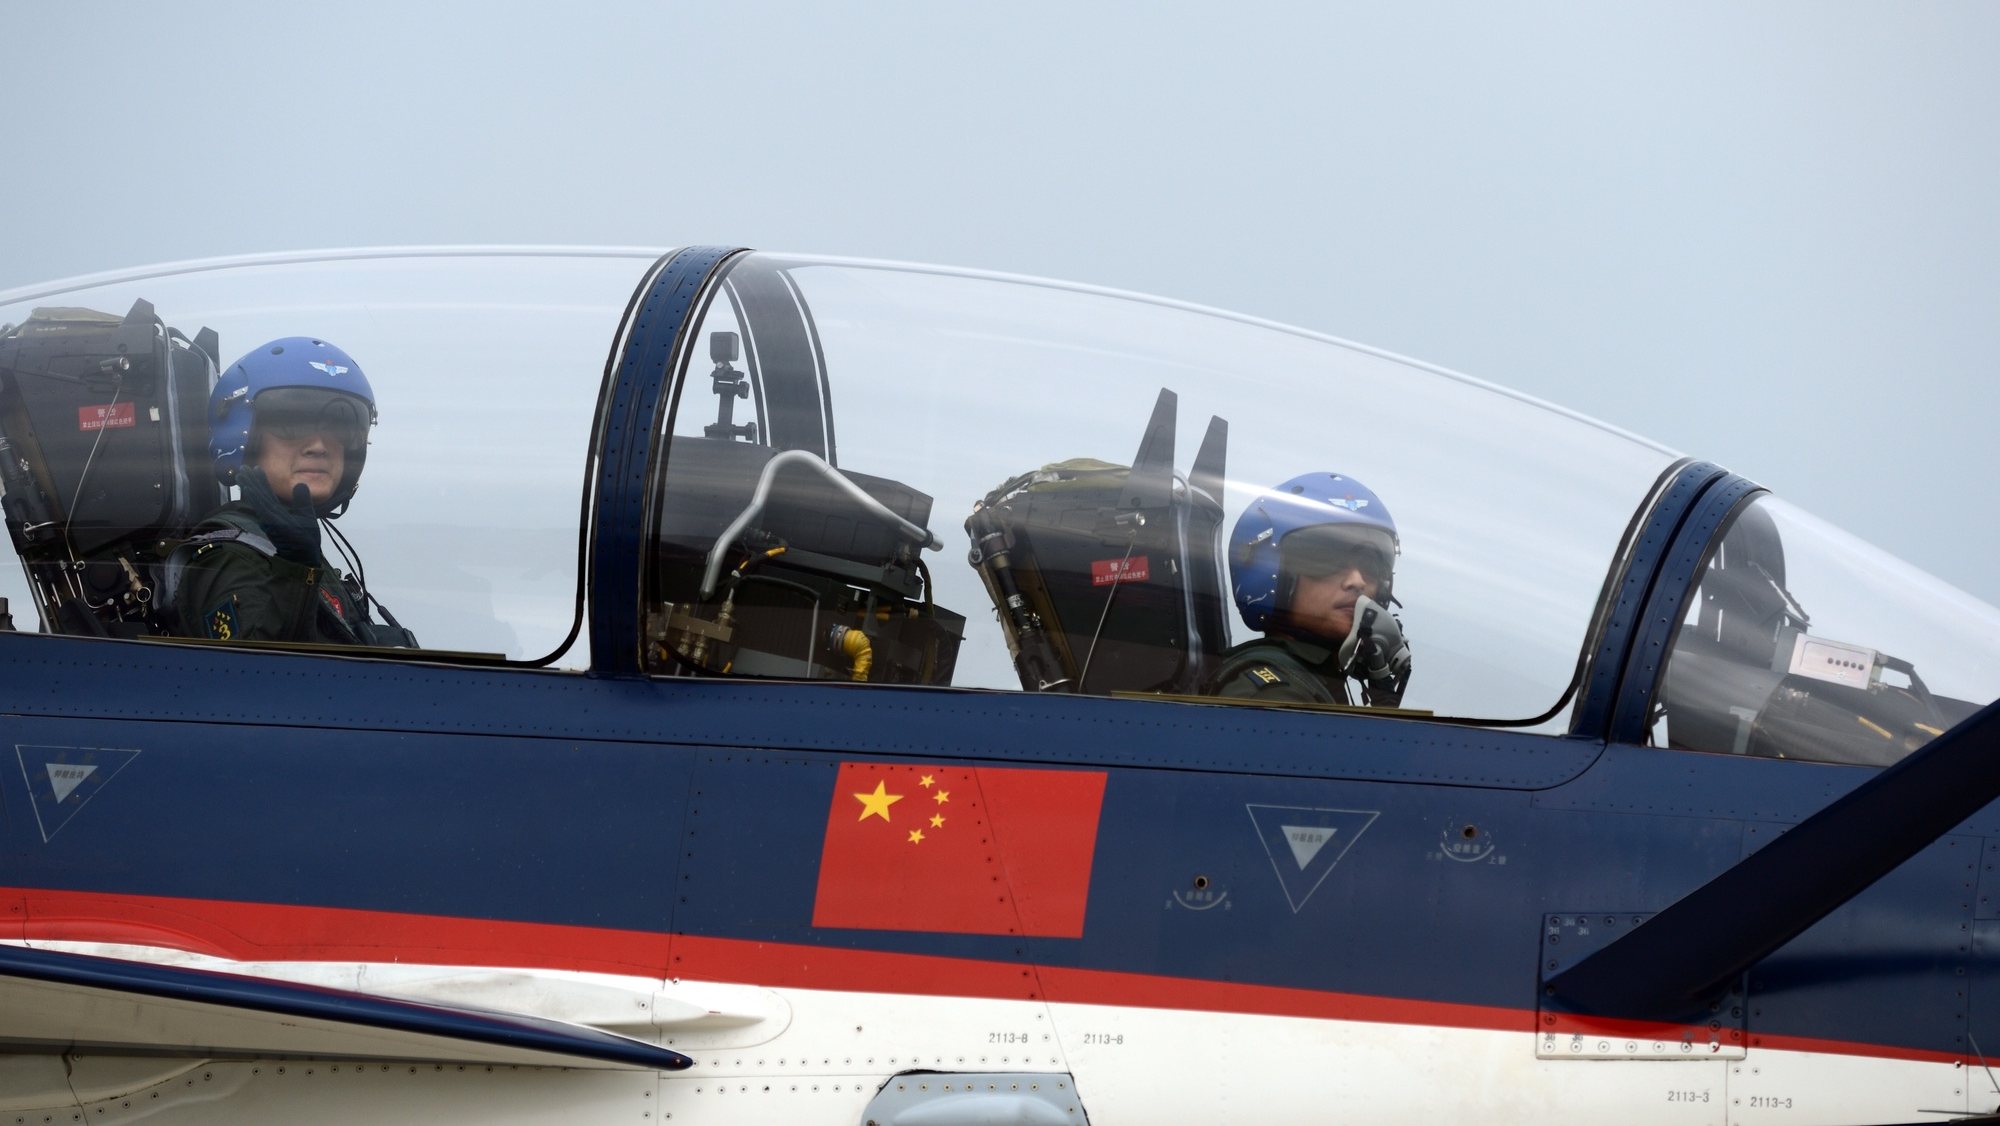 epa06998541 Members of the August 1st Aerobatic Team drive J-10 fighter jet to perform at Aviation University of Air Force during an aviation open day of the Air Force in Changchun, China&#039;s Jilin province, 02 September 2018 (issued 05 September 2018). The aviation open day of the Air Force of the CPLA and the opening ceremony for the Aviation University of Air Force (AUAF) was held at the Dafangshen Airport in Changchun from 30 August to 02 September 2018.  EPA/STRINGER CHINA OUT